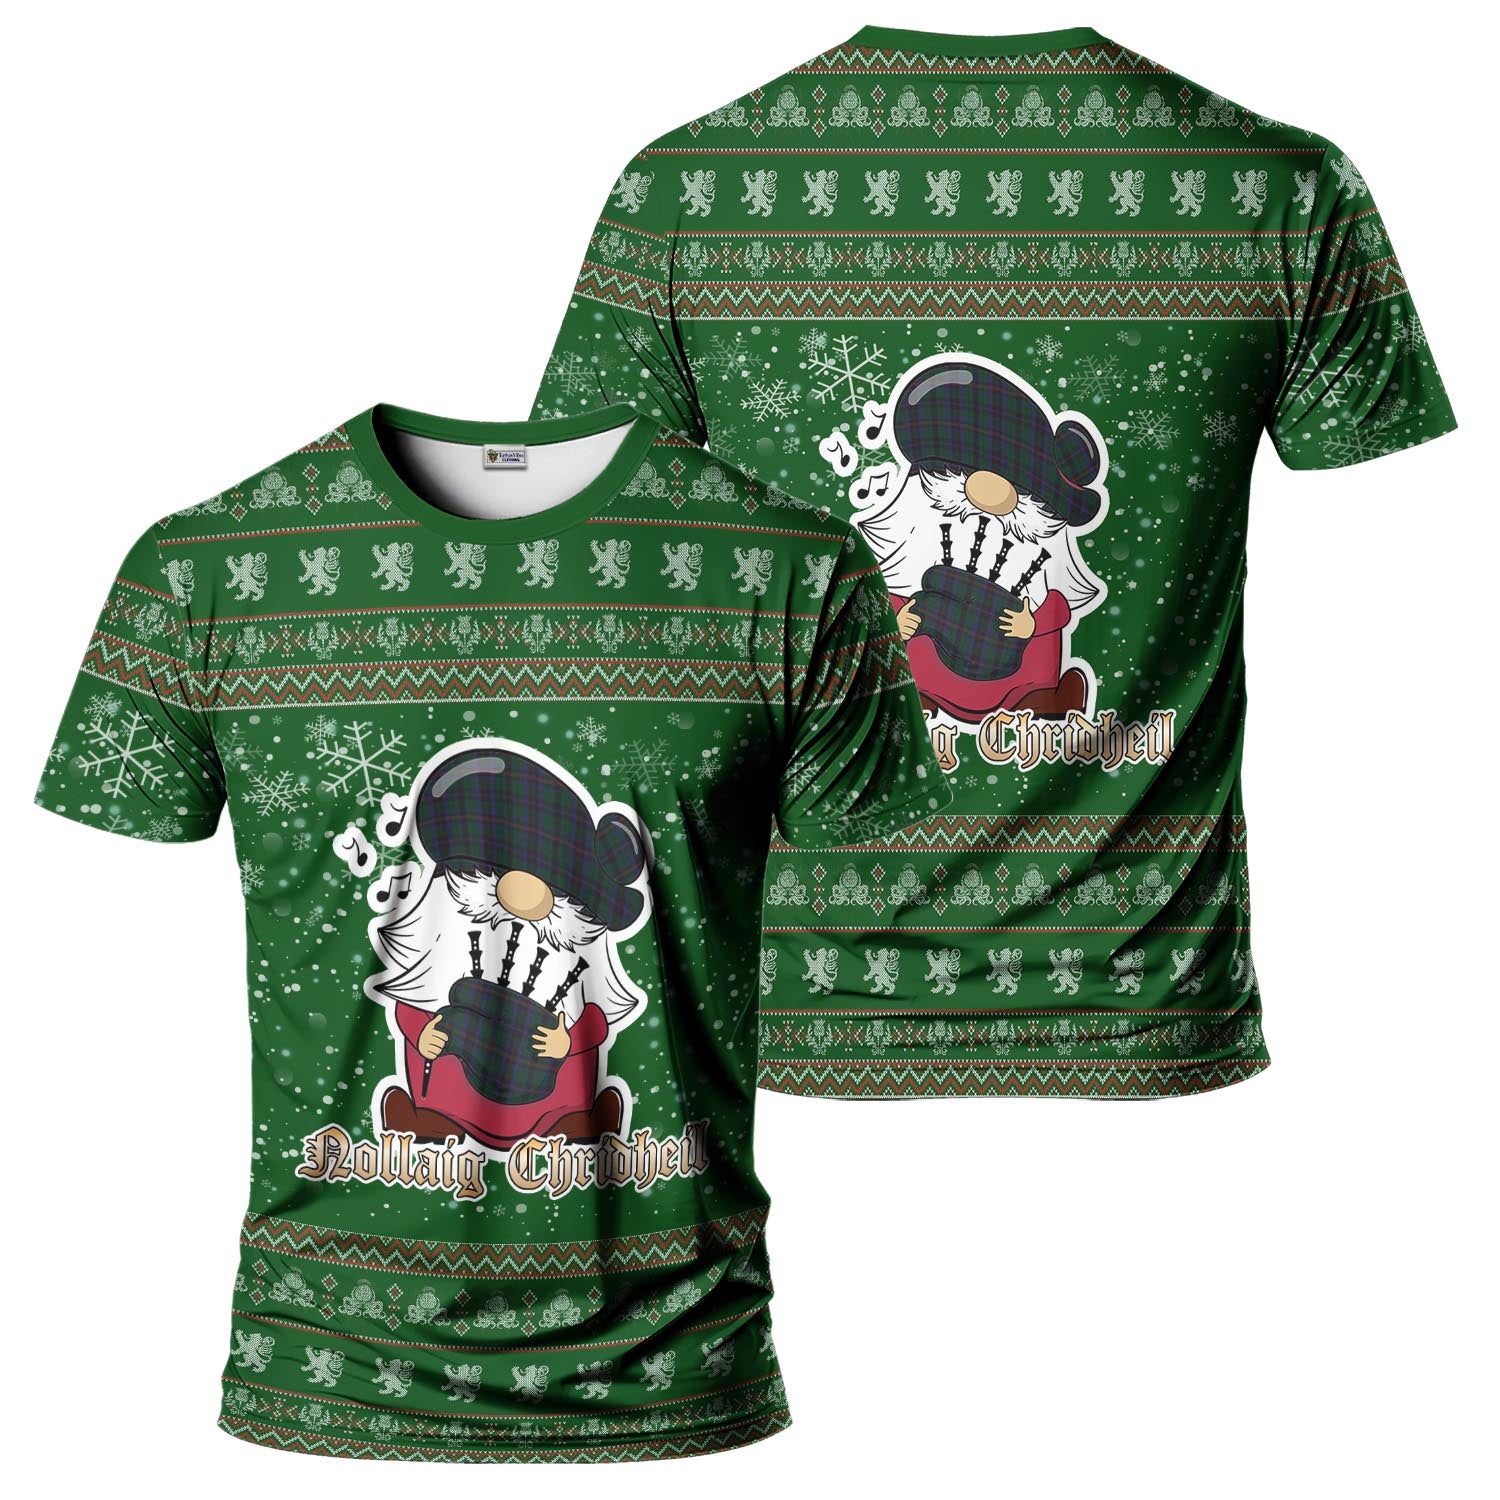 Phillips of Wales Clan Christmas Family T-Shirt with Funny Gnome Playing Bagpipes Men's Shirt Green - Tartanvibesclothing